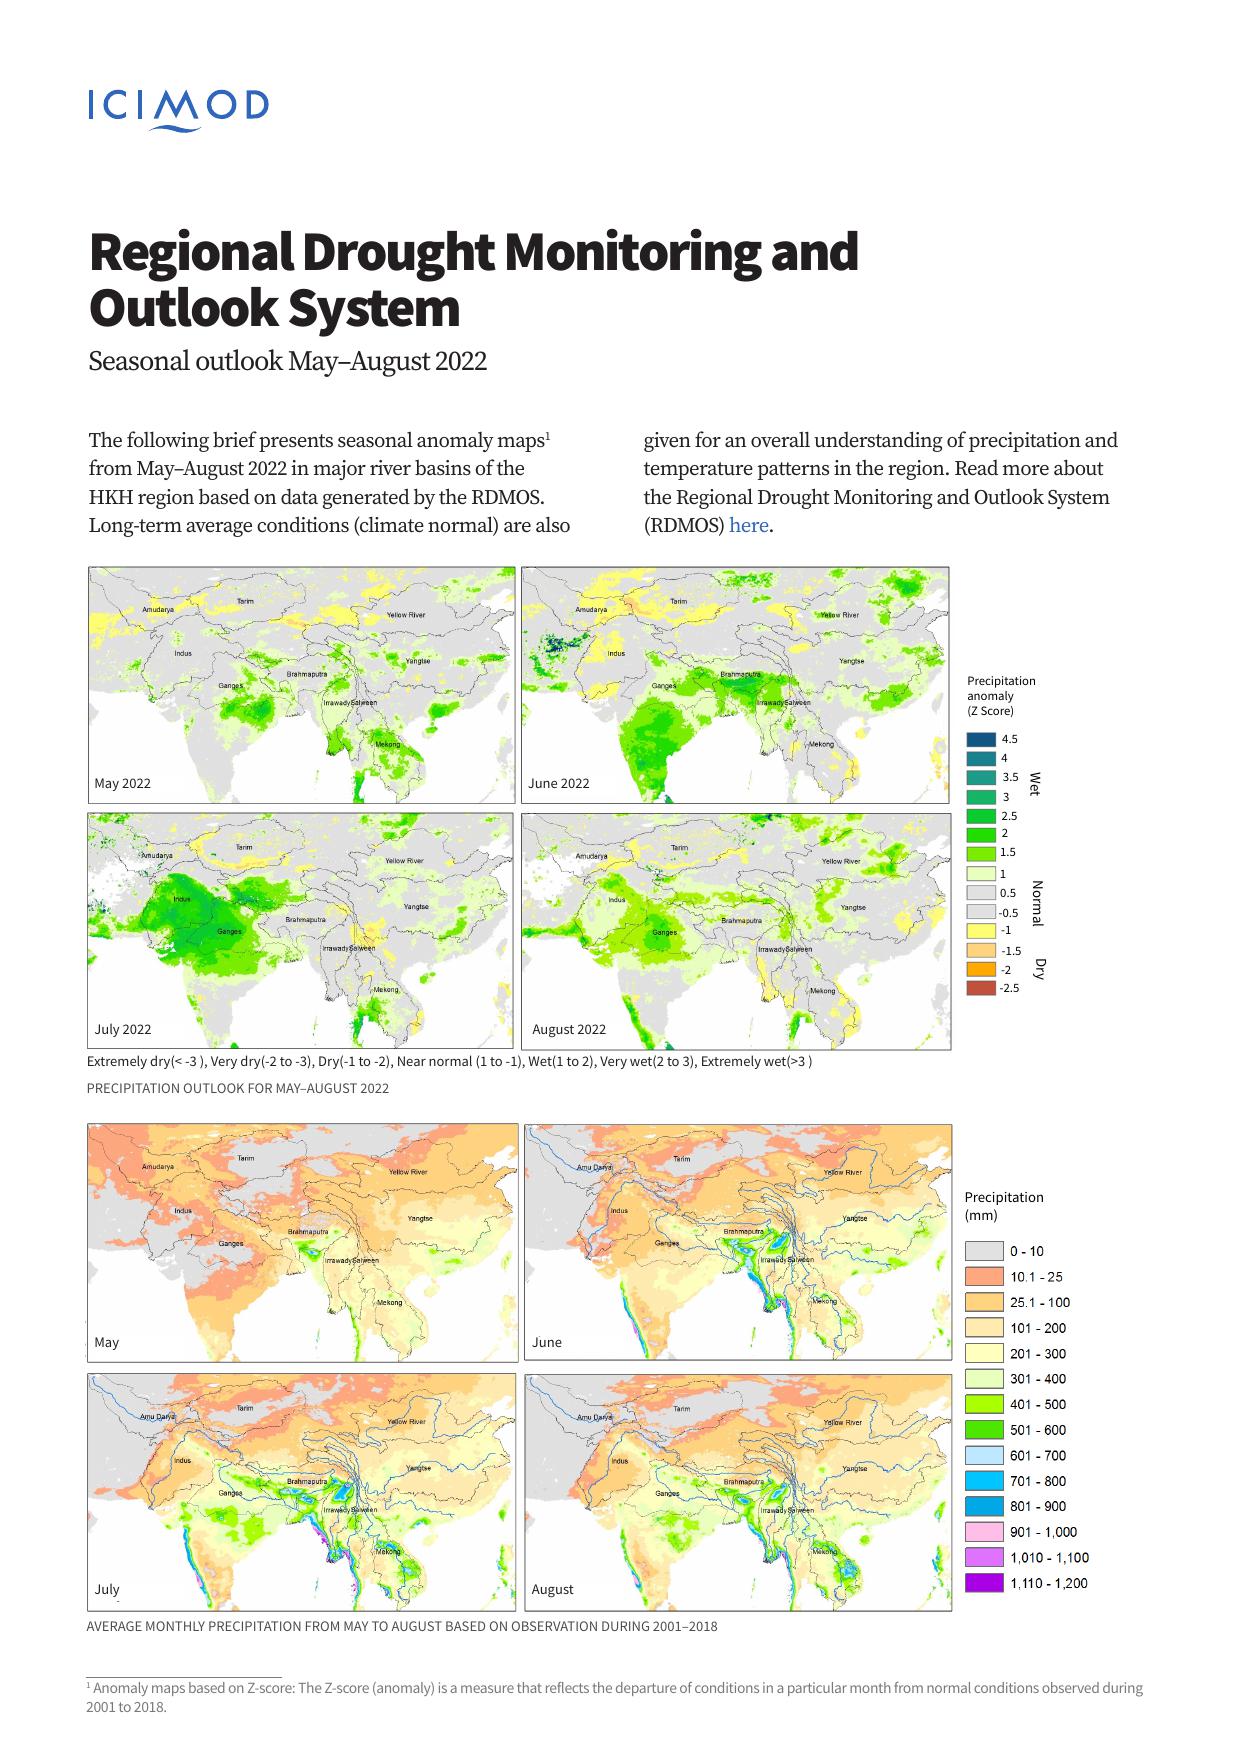 Regional Drought Monitoring and Outlook System: Seasonal Outlook May-August 2022